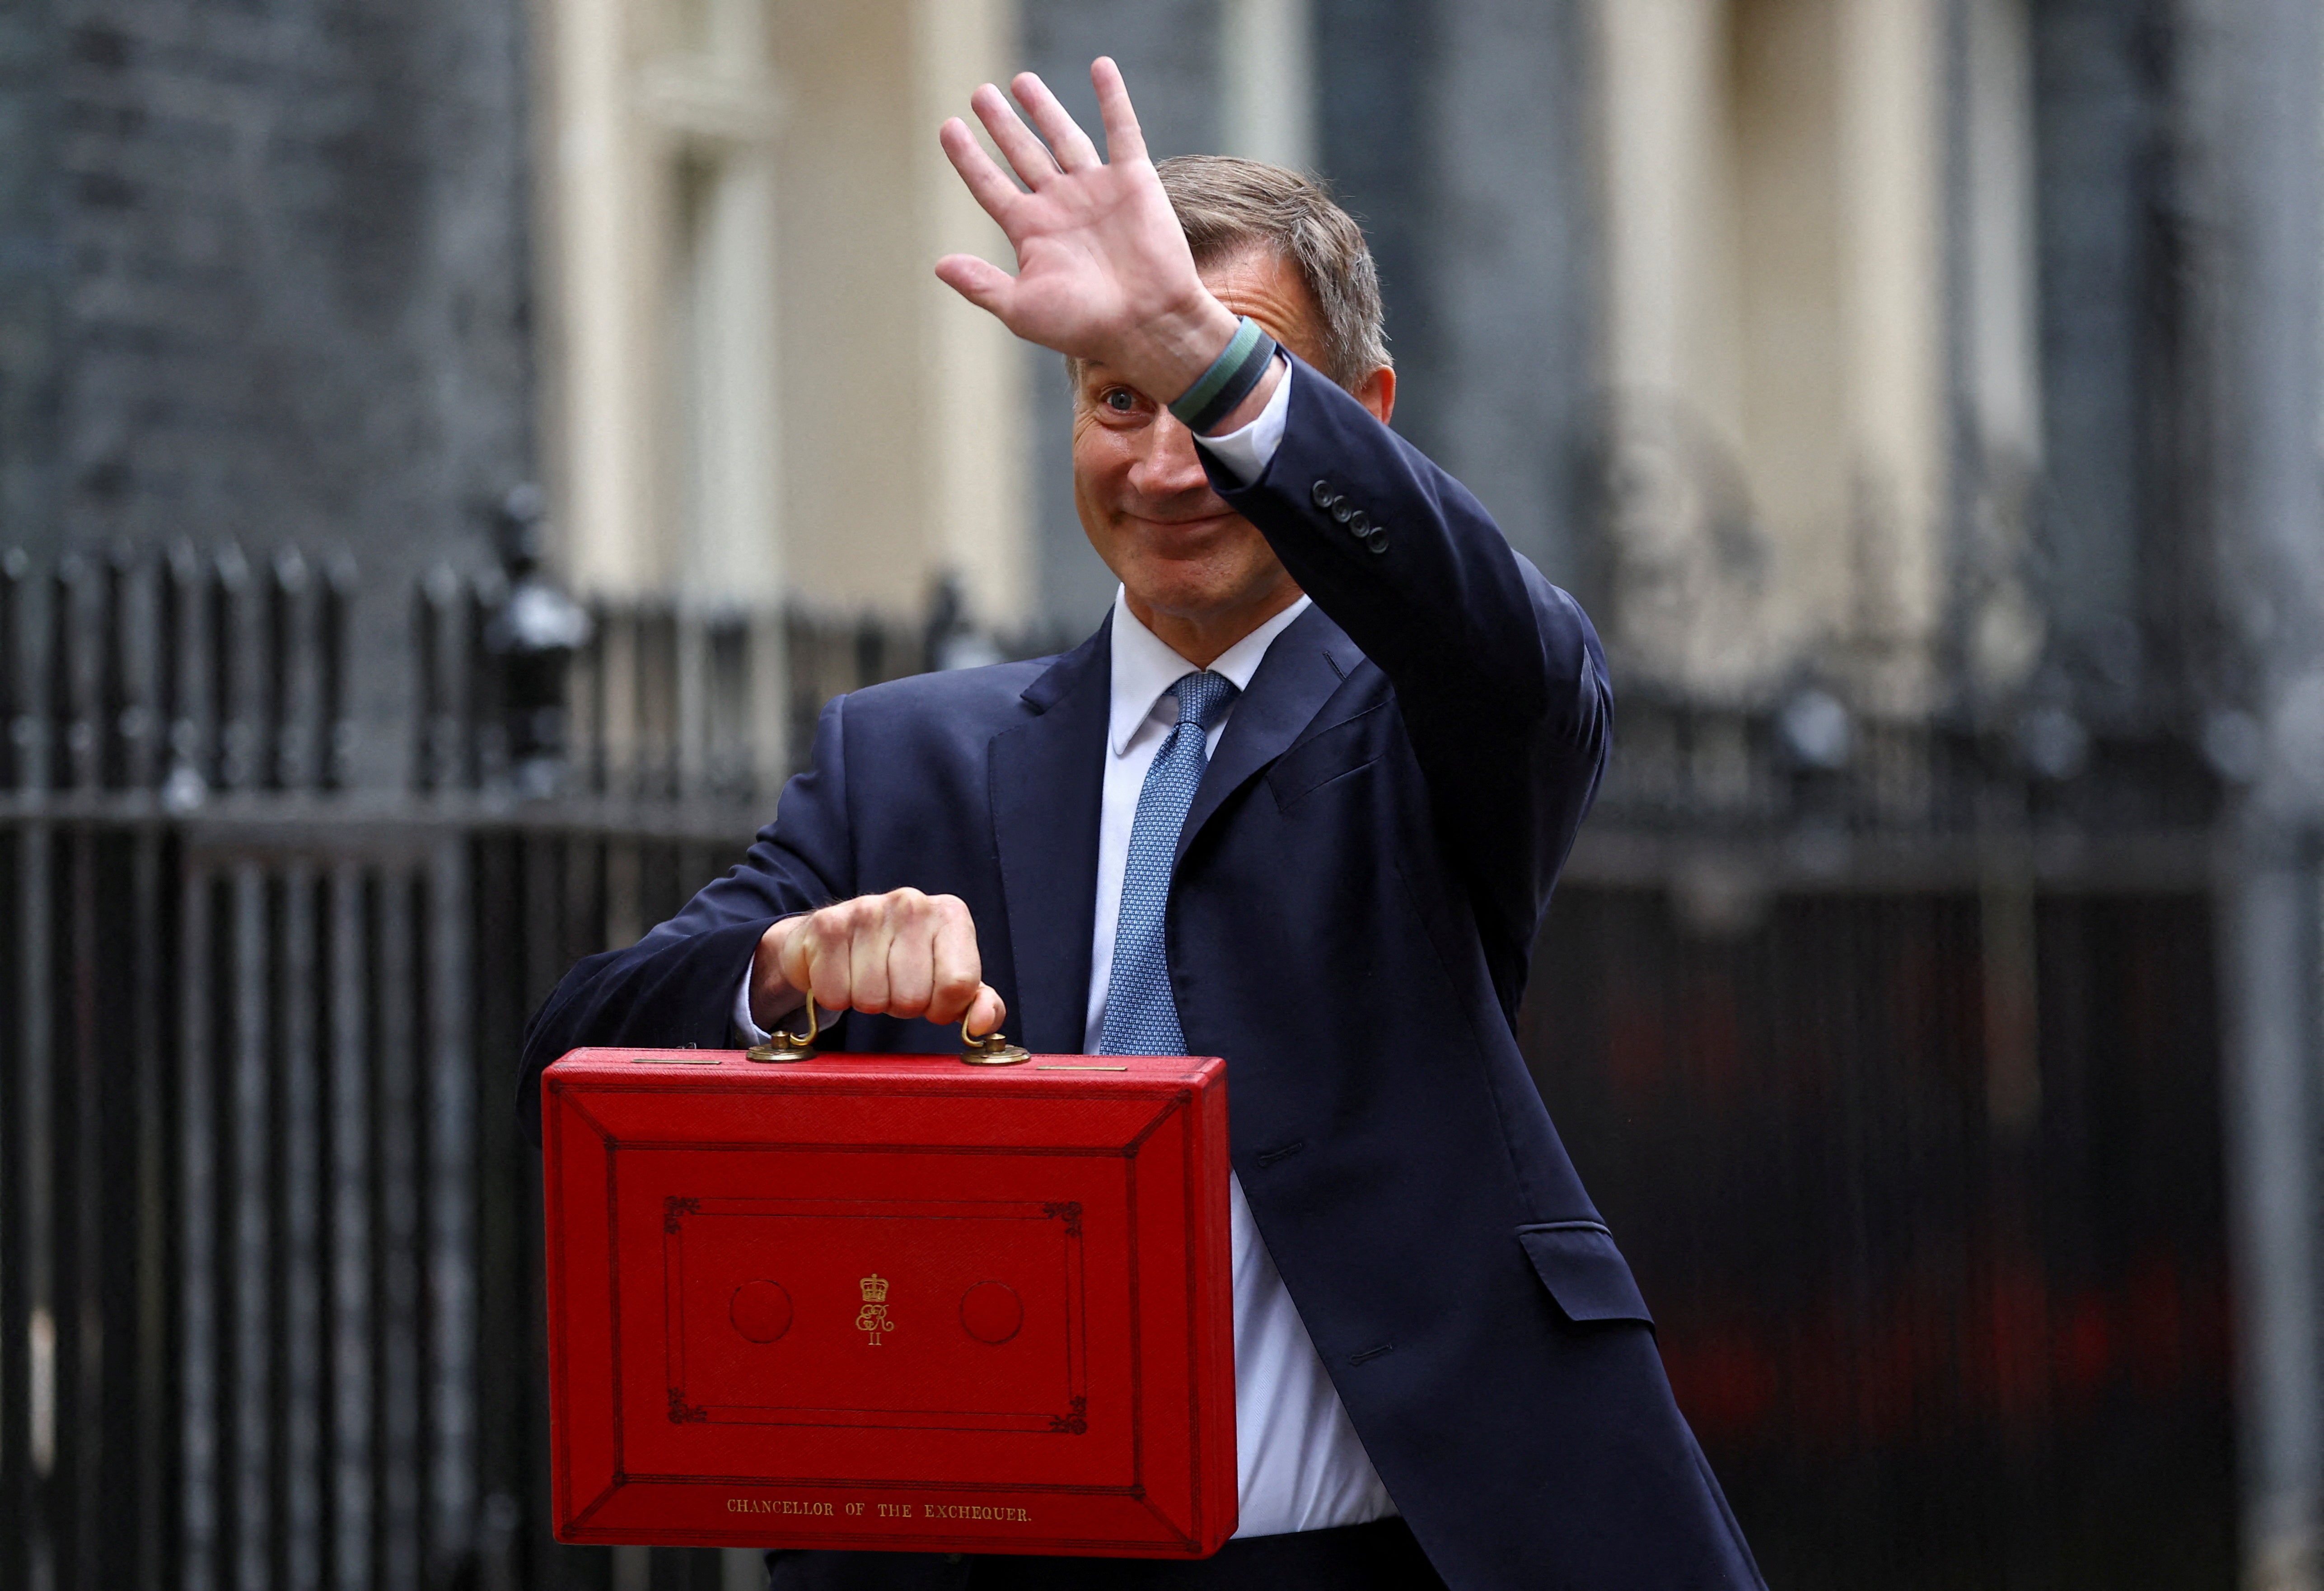 Britain’s Chancellor of the Exchequer Jeremy Hunt gestures as he poses with the budget box at Downing Street